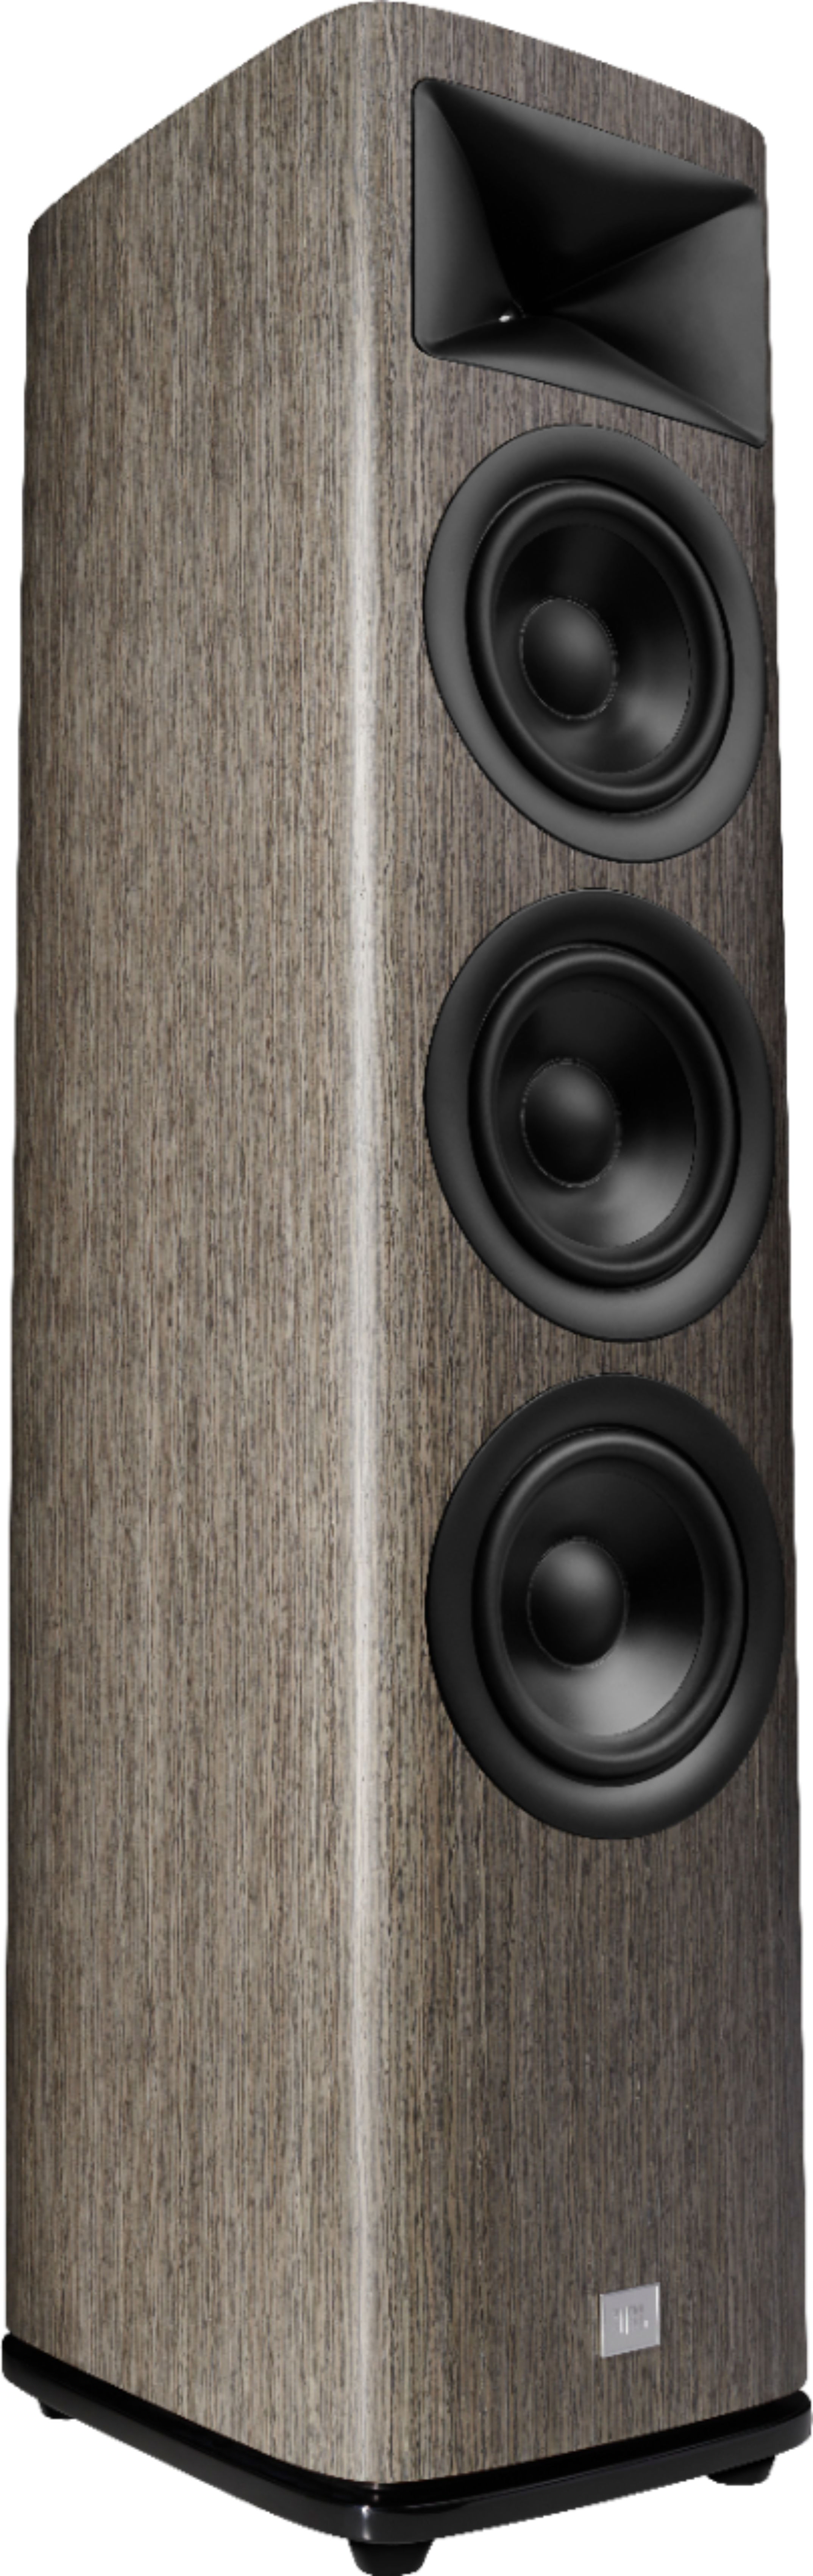 Angle View: JBL - HDI3600 Triple 6.5-inch 2-1/2 way Floorstanding Loudspeaker with 1" compression tweeter - Gray Oak Finish